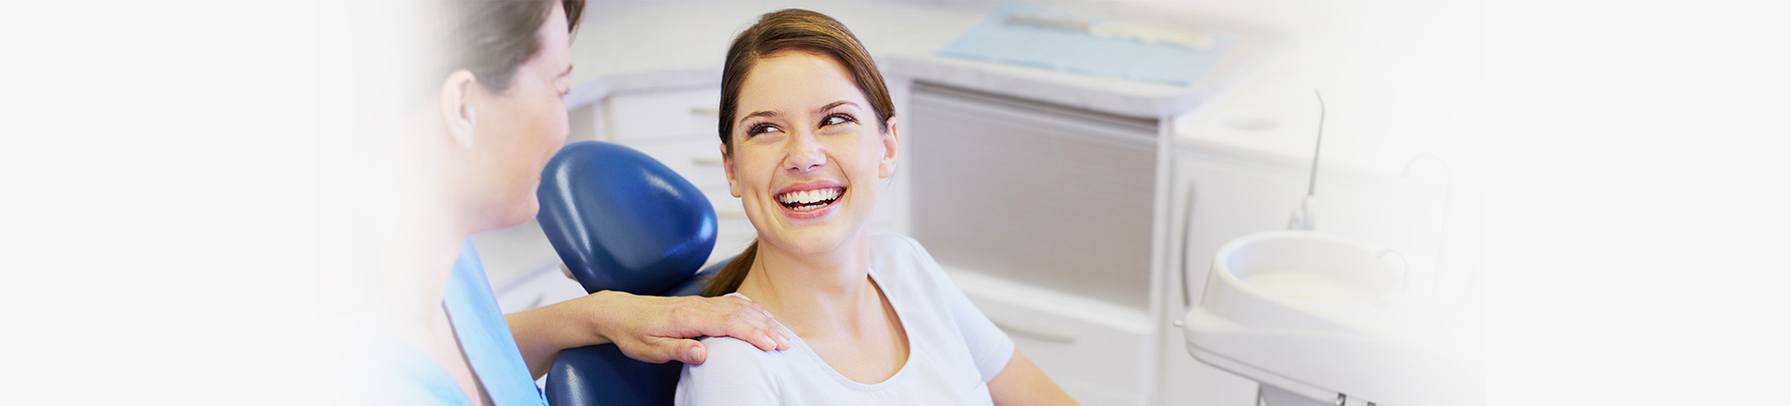 Dental implants are great replacements for chipped or cracked teeth.